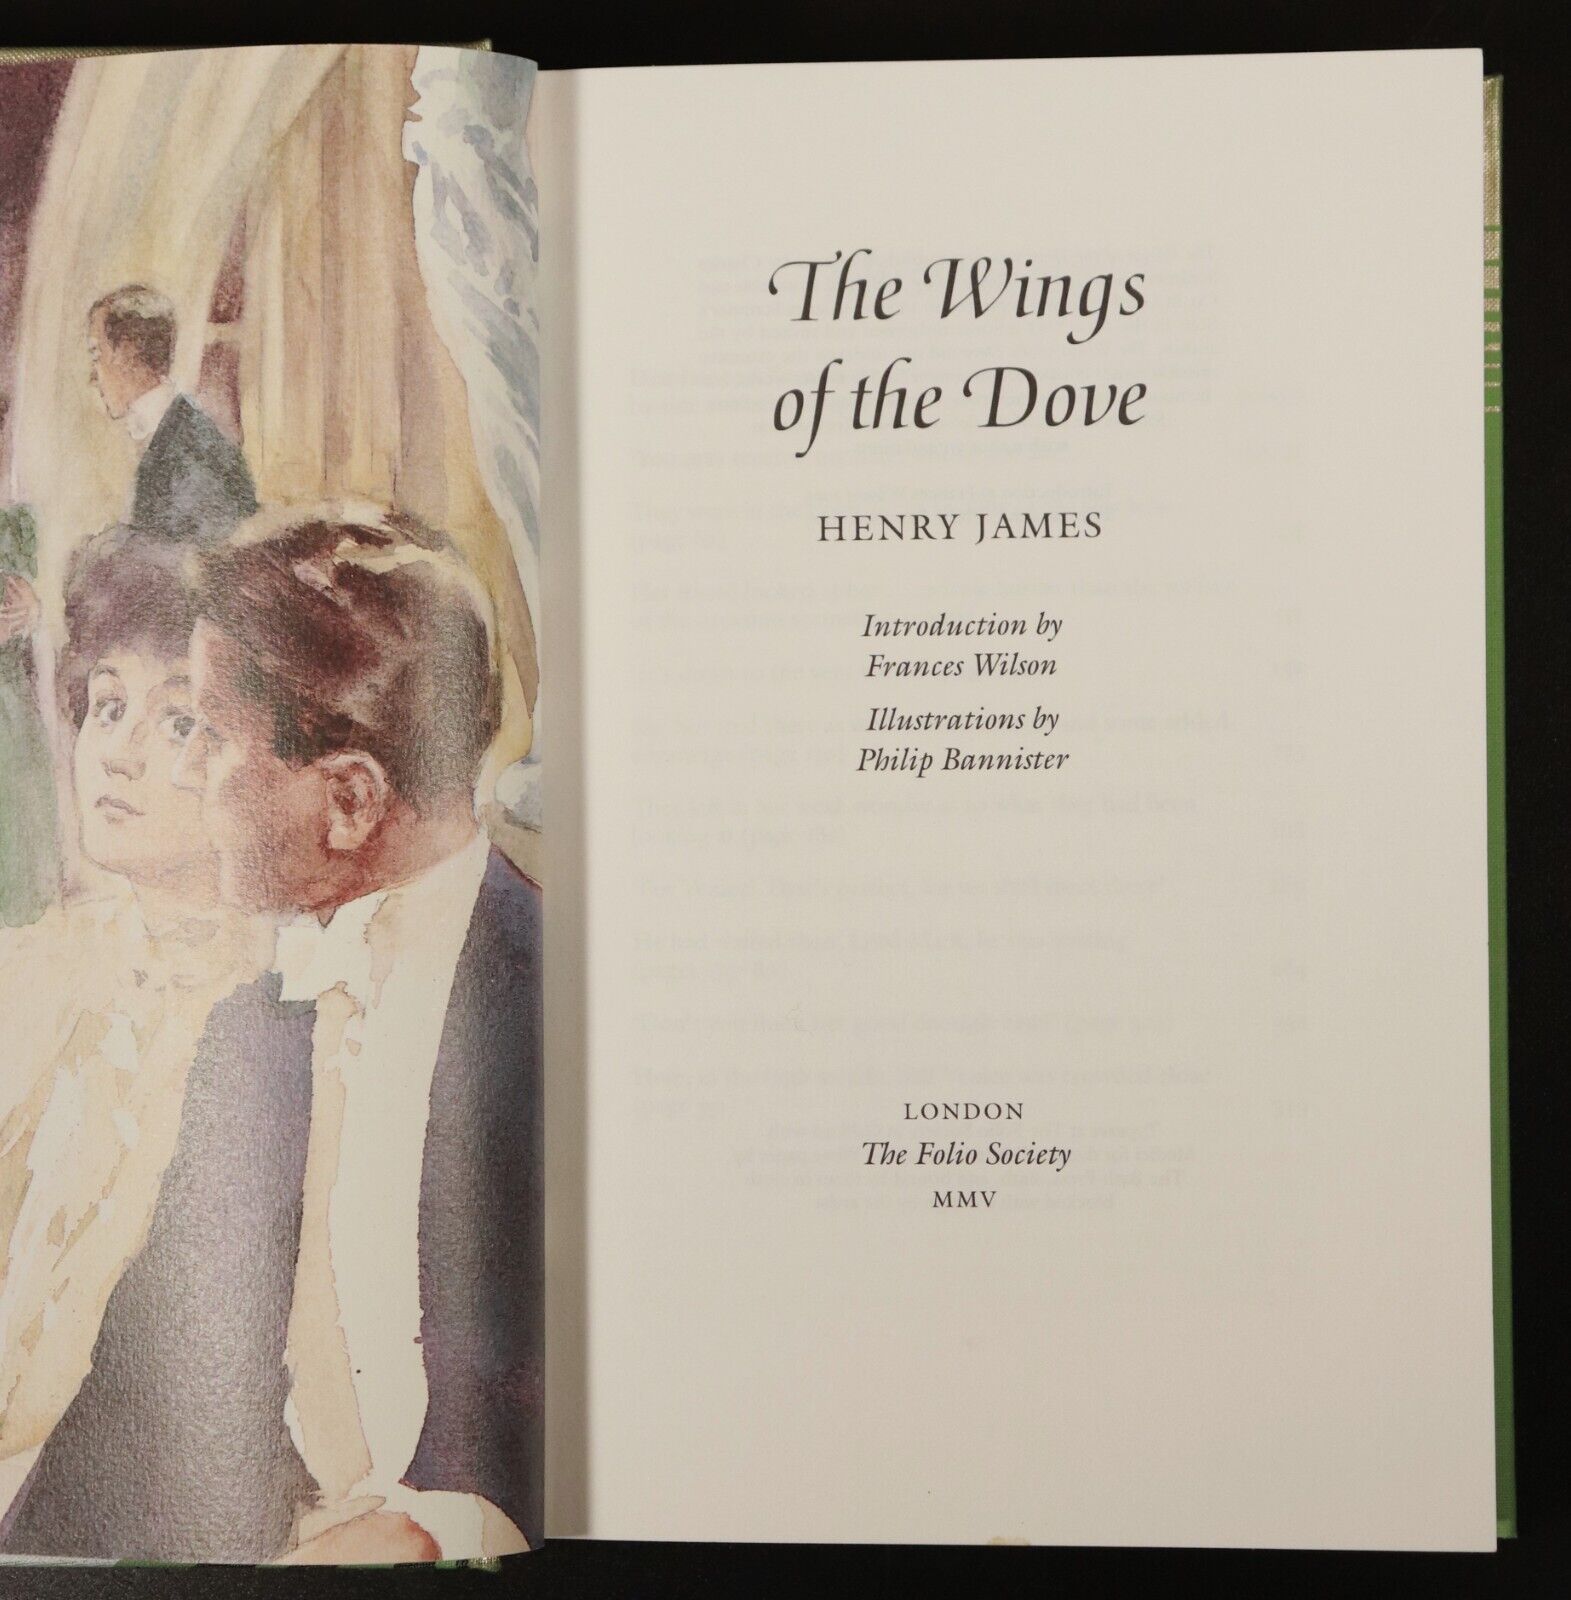 2005 The Wings Of The Dove by Henry James Folio Society Classic Fiction Book - 0